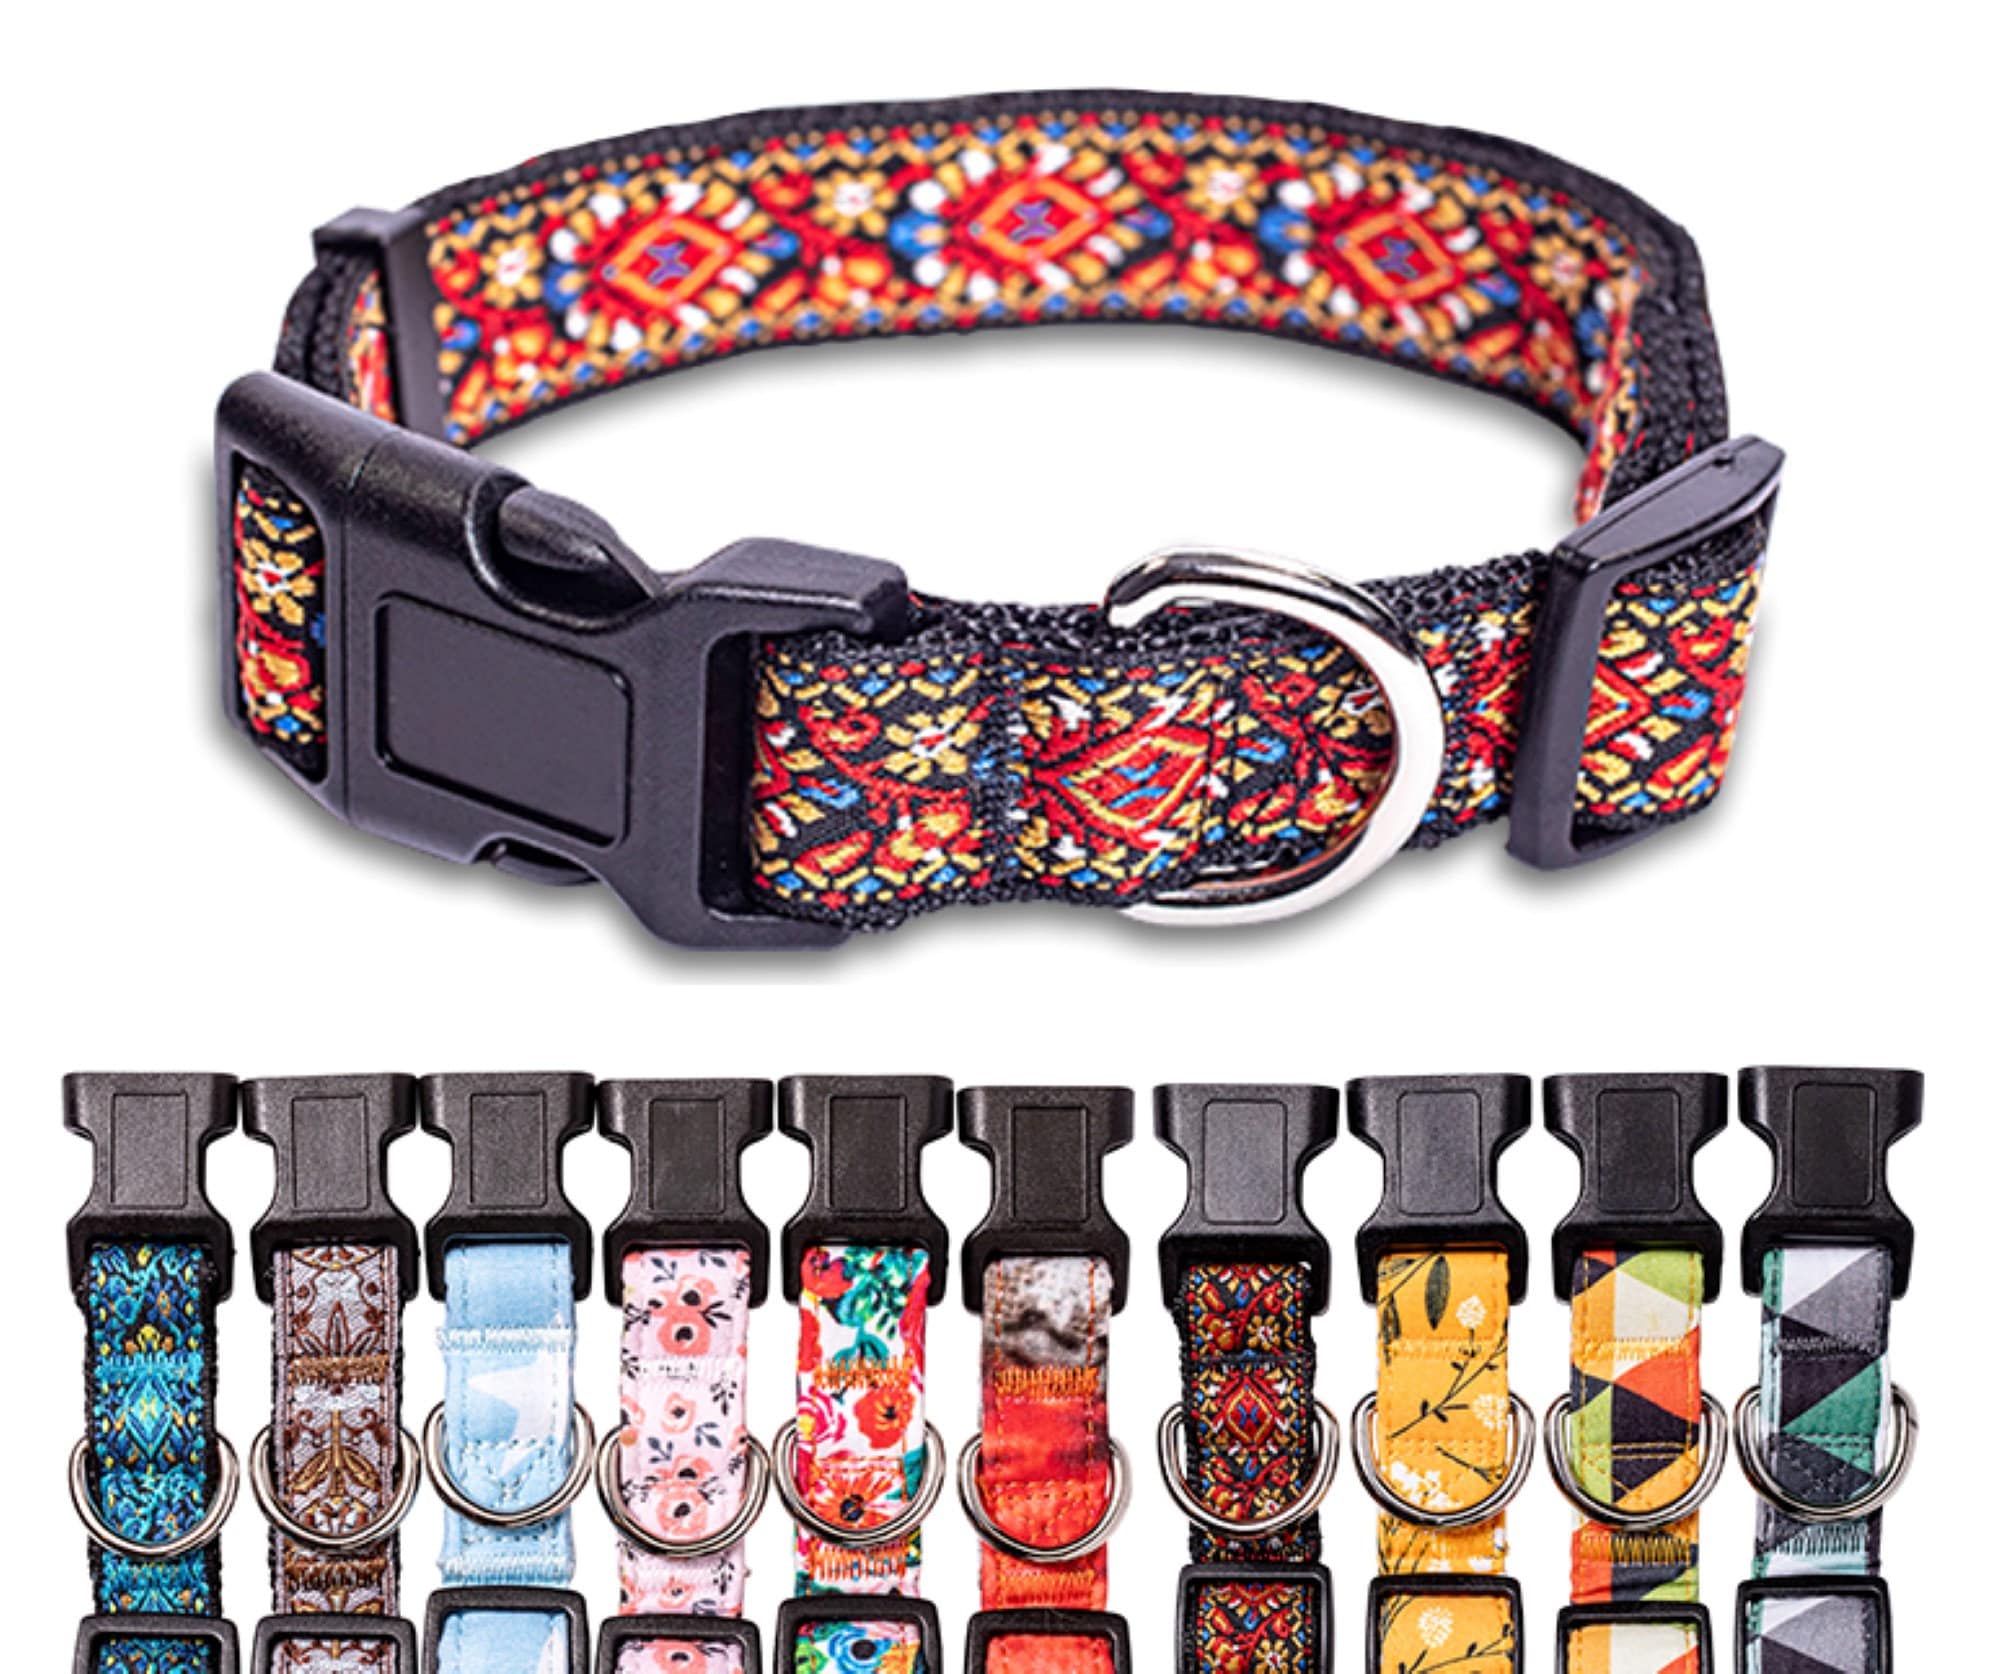 Okuna Outpost Fancy Pink Dog Collars for Small Pets (4 Pack)